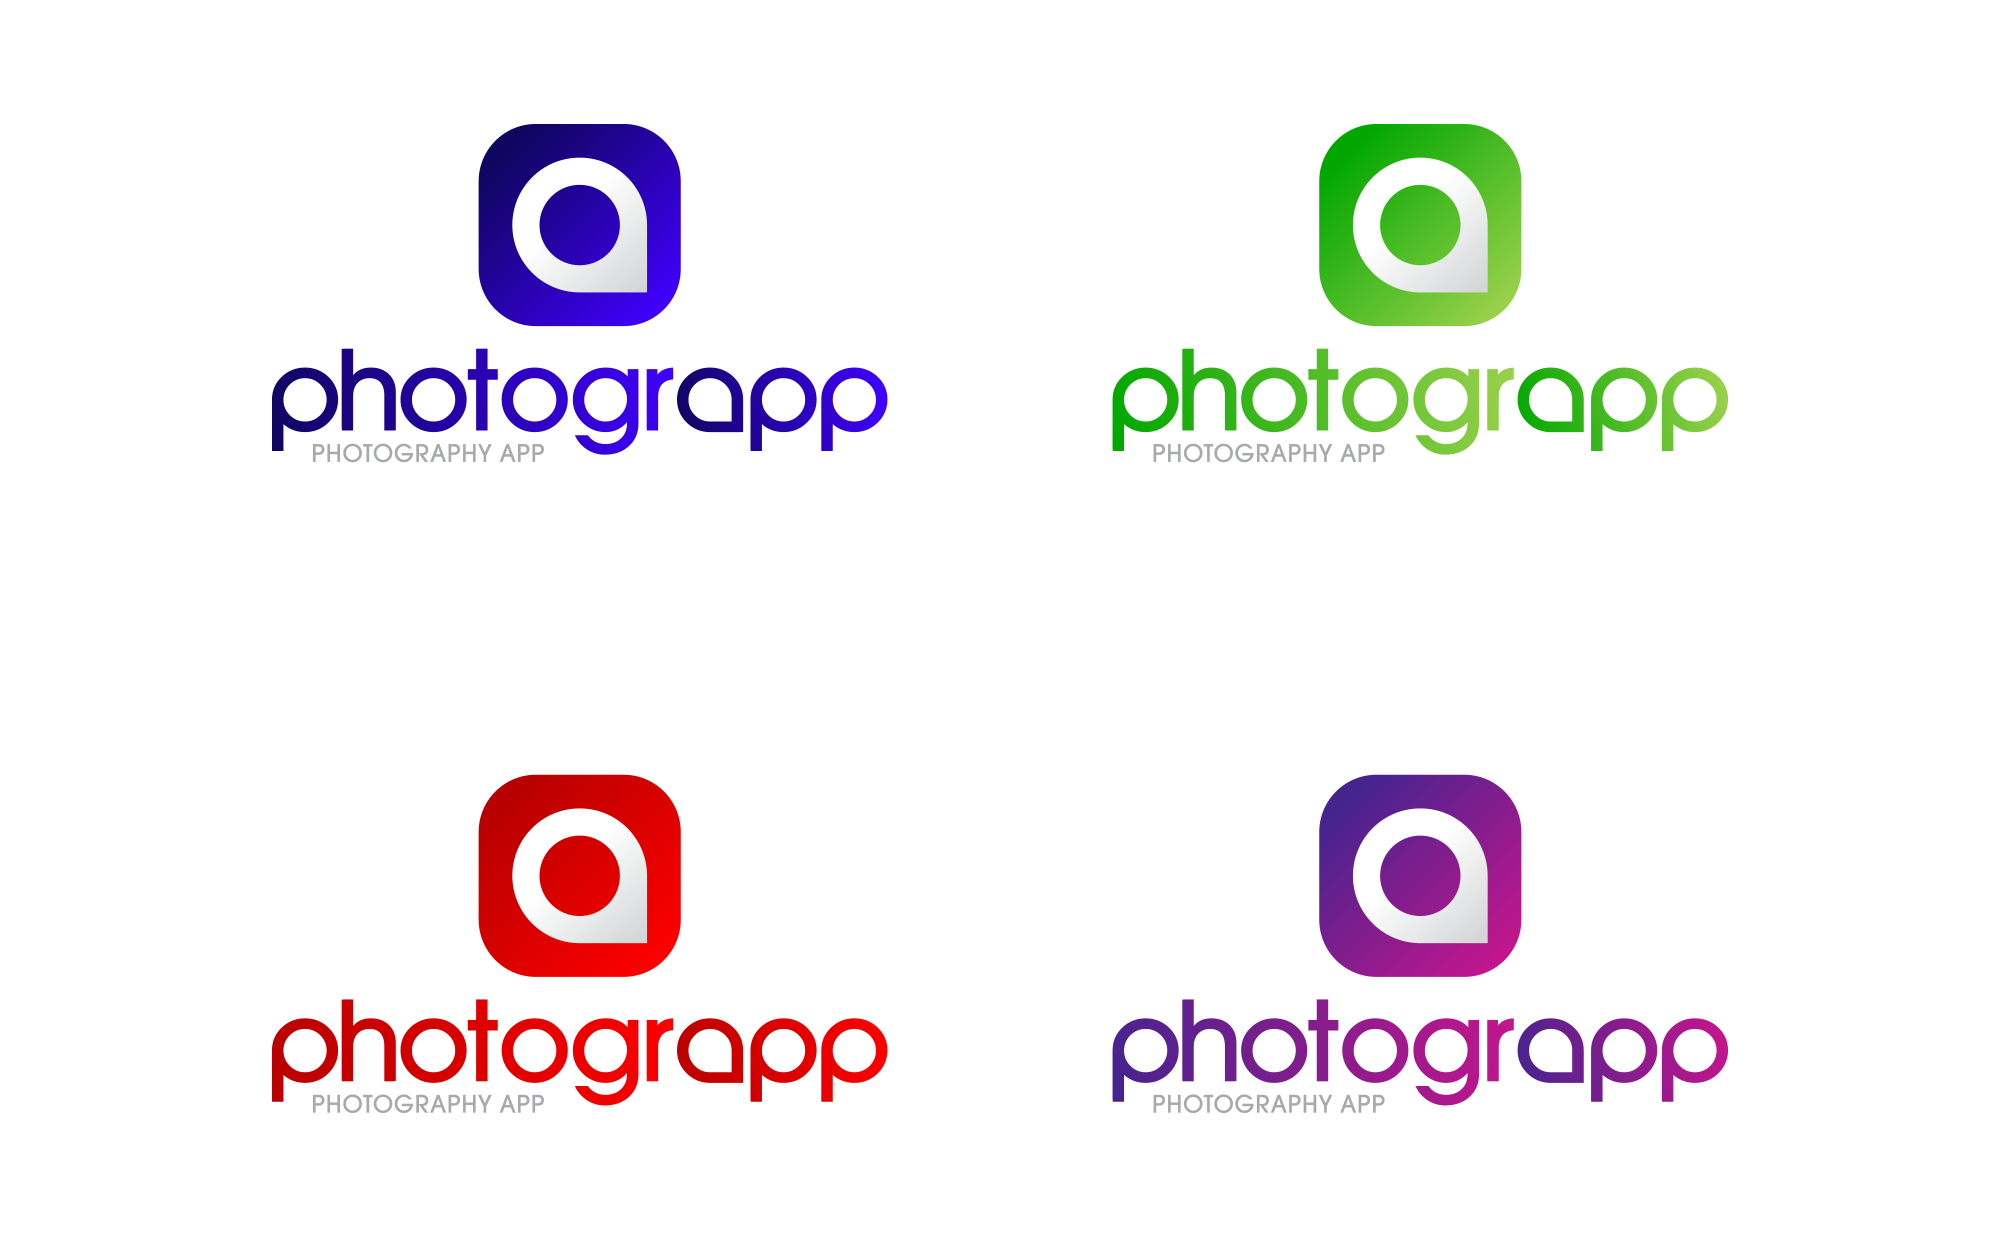 photograpp_collage.png